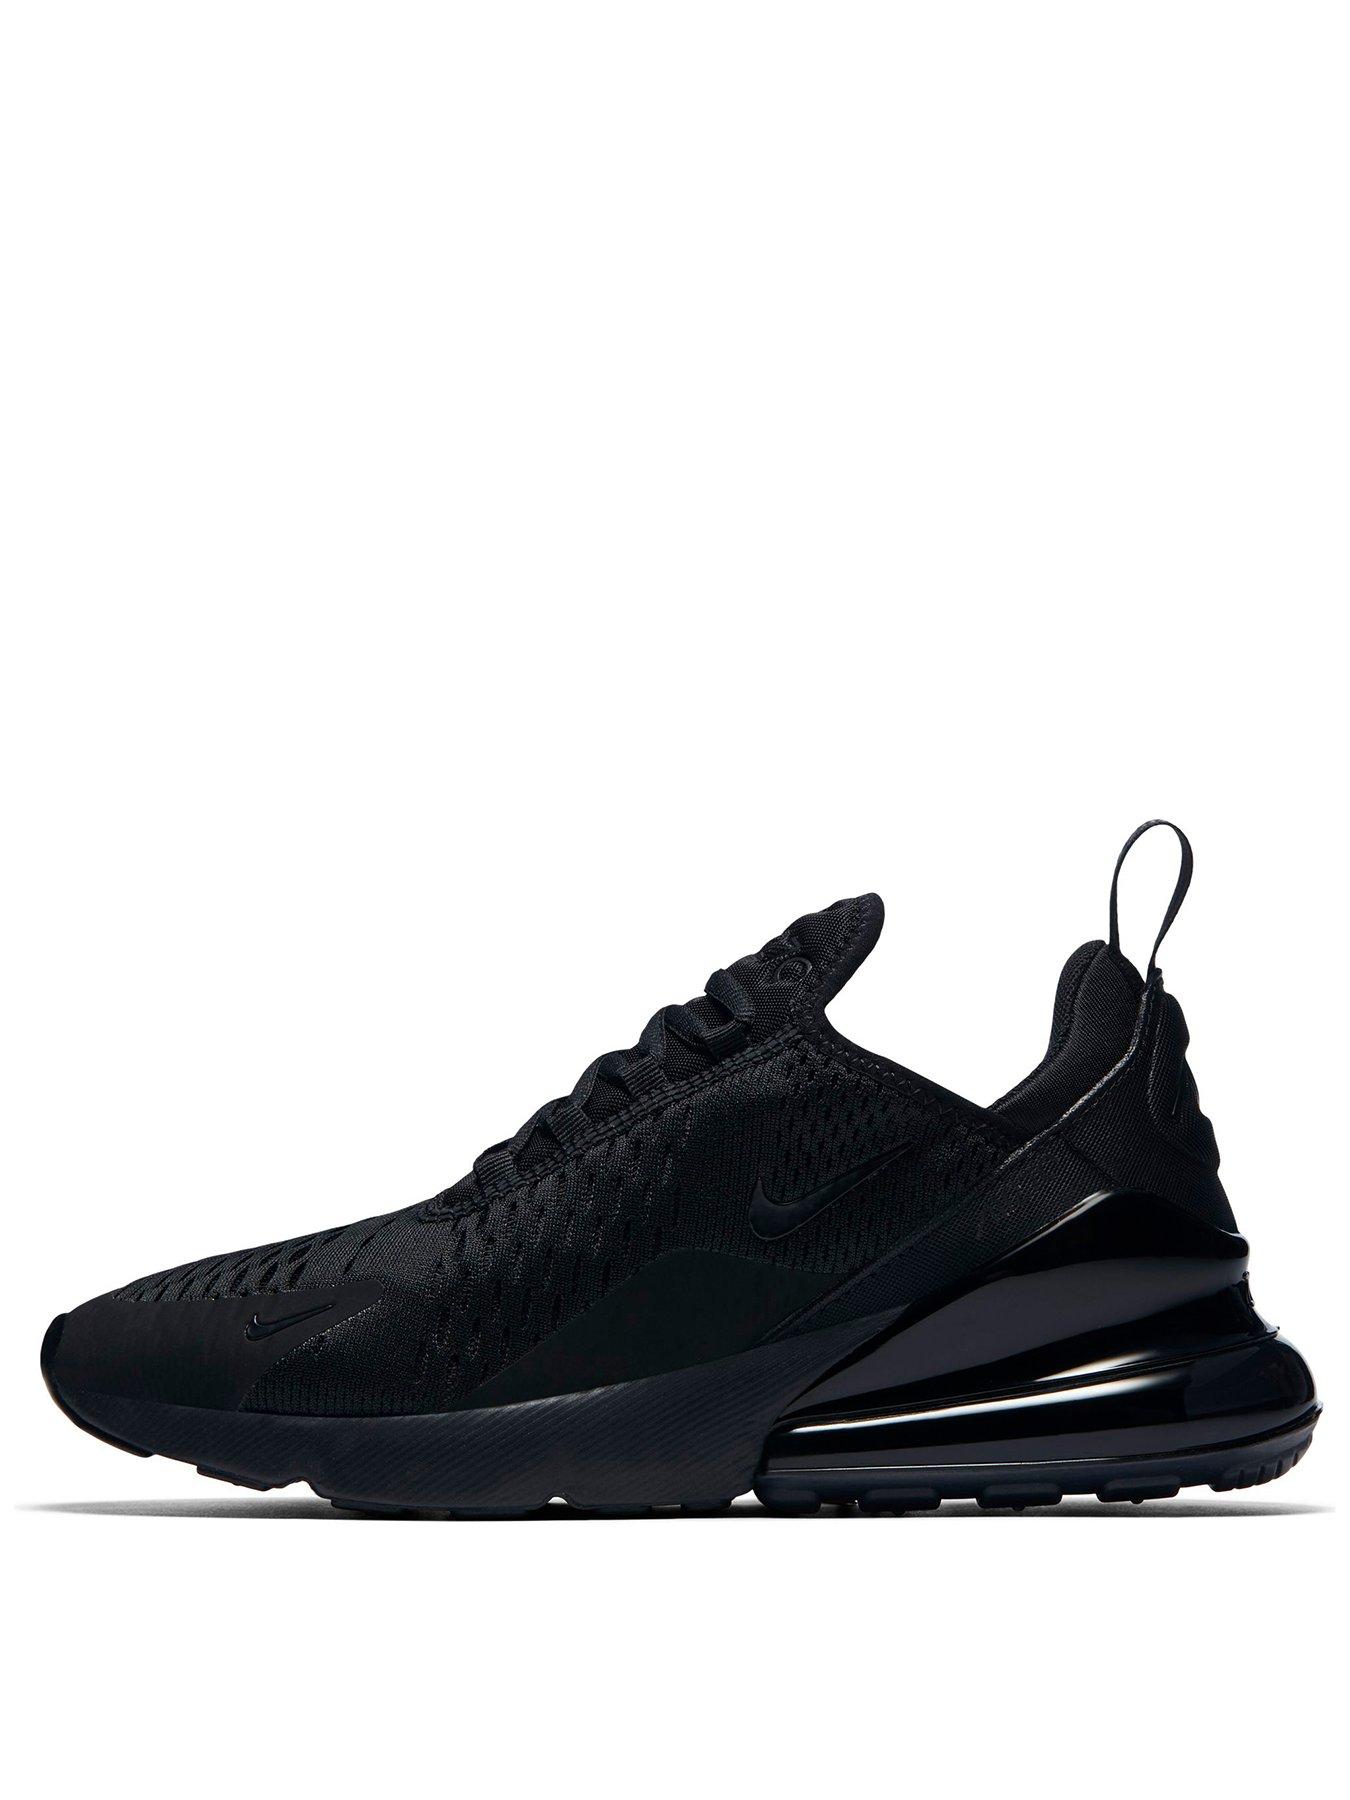 nike air max 270 black and white size 3